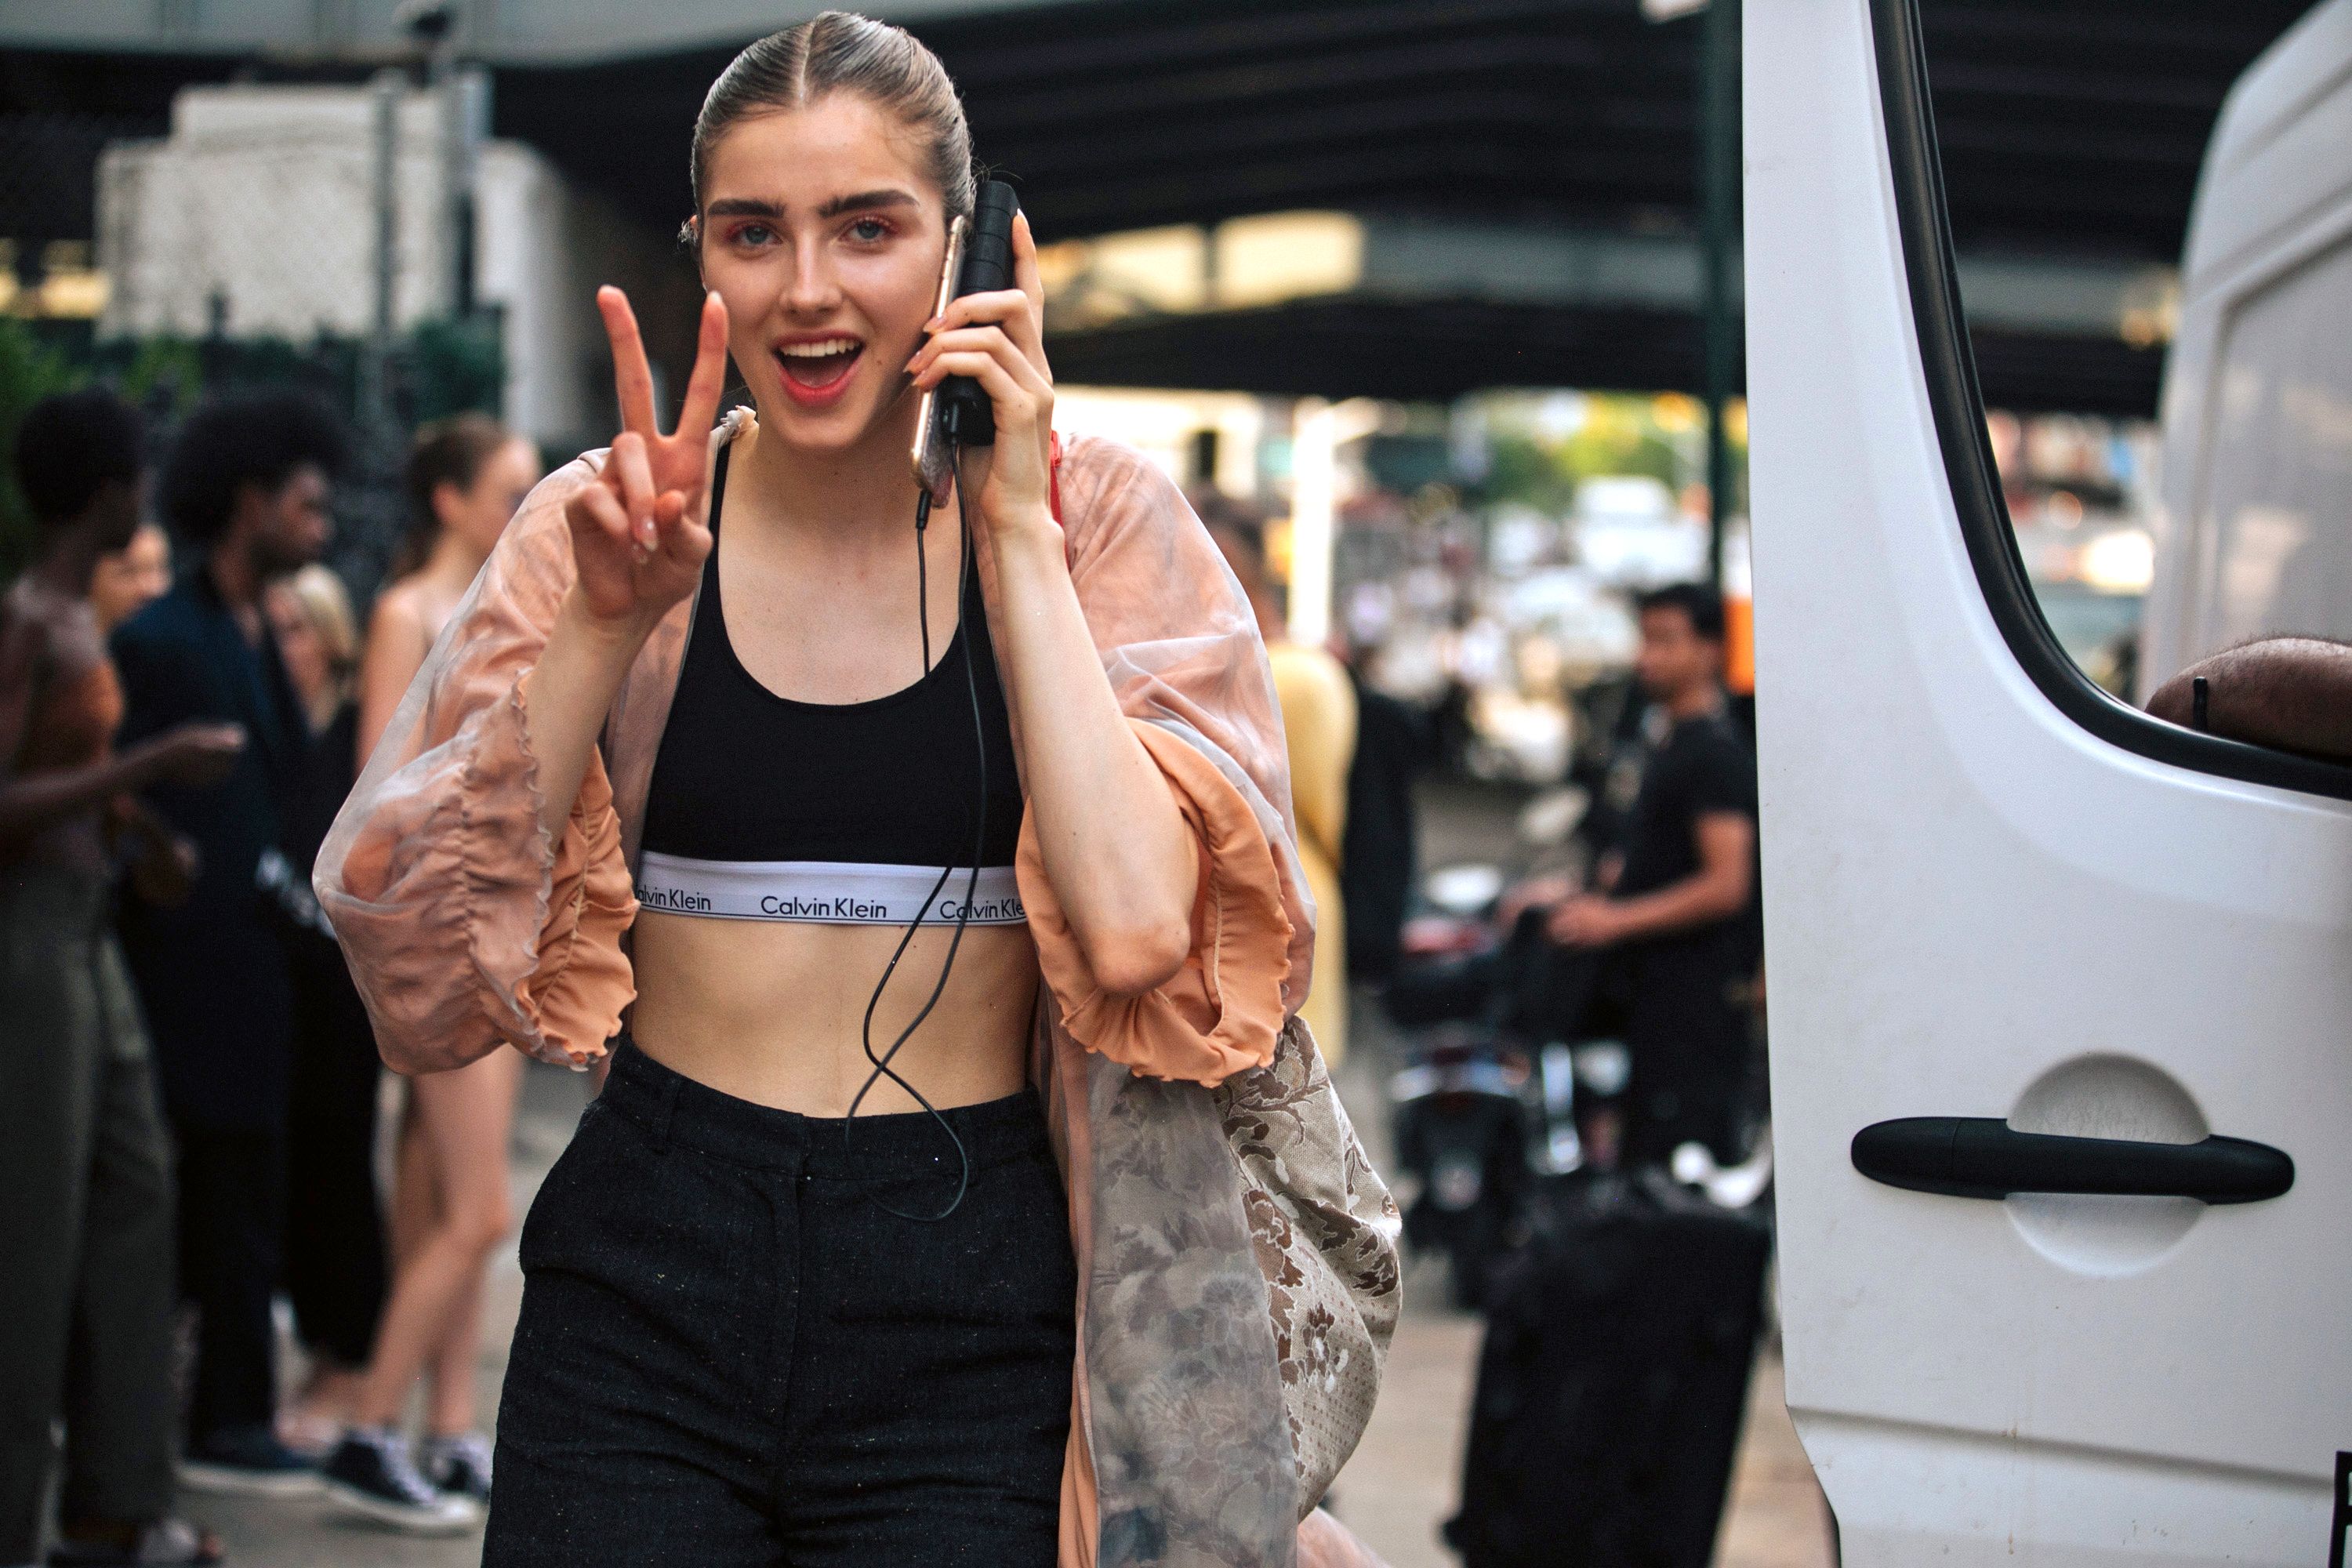 How to Style a Sports Bra, According to Influencers